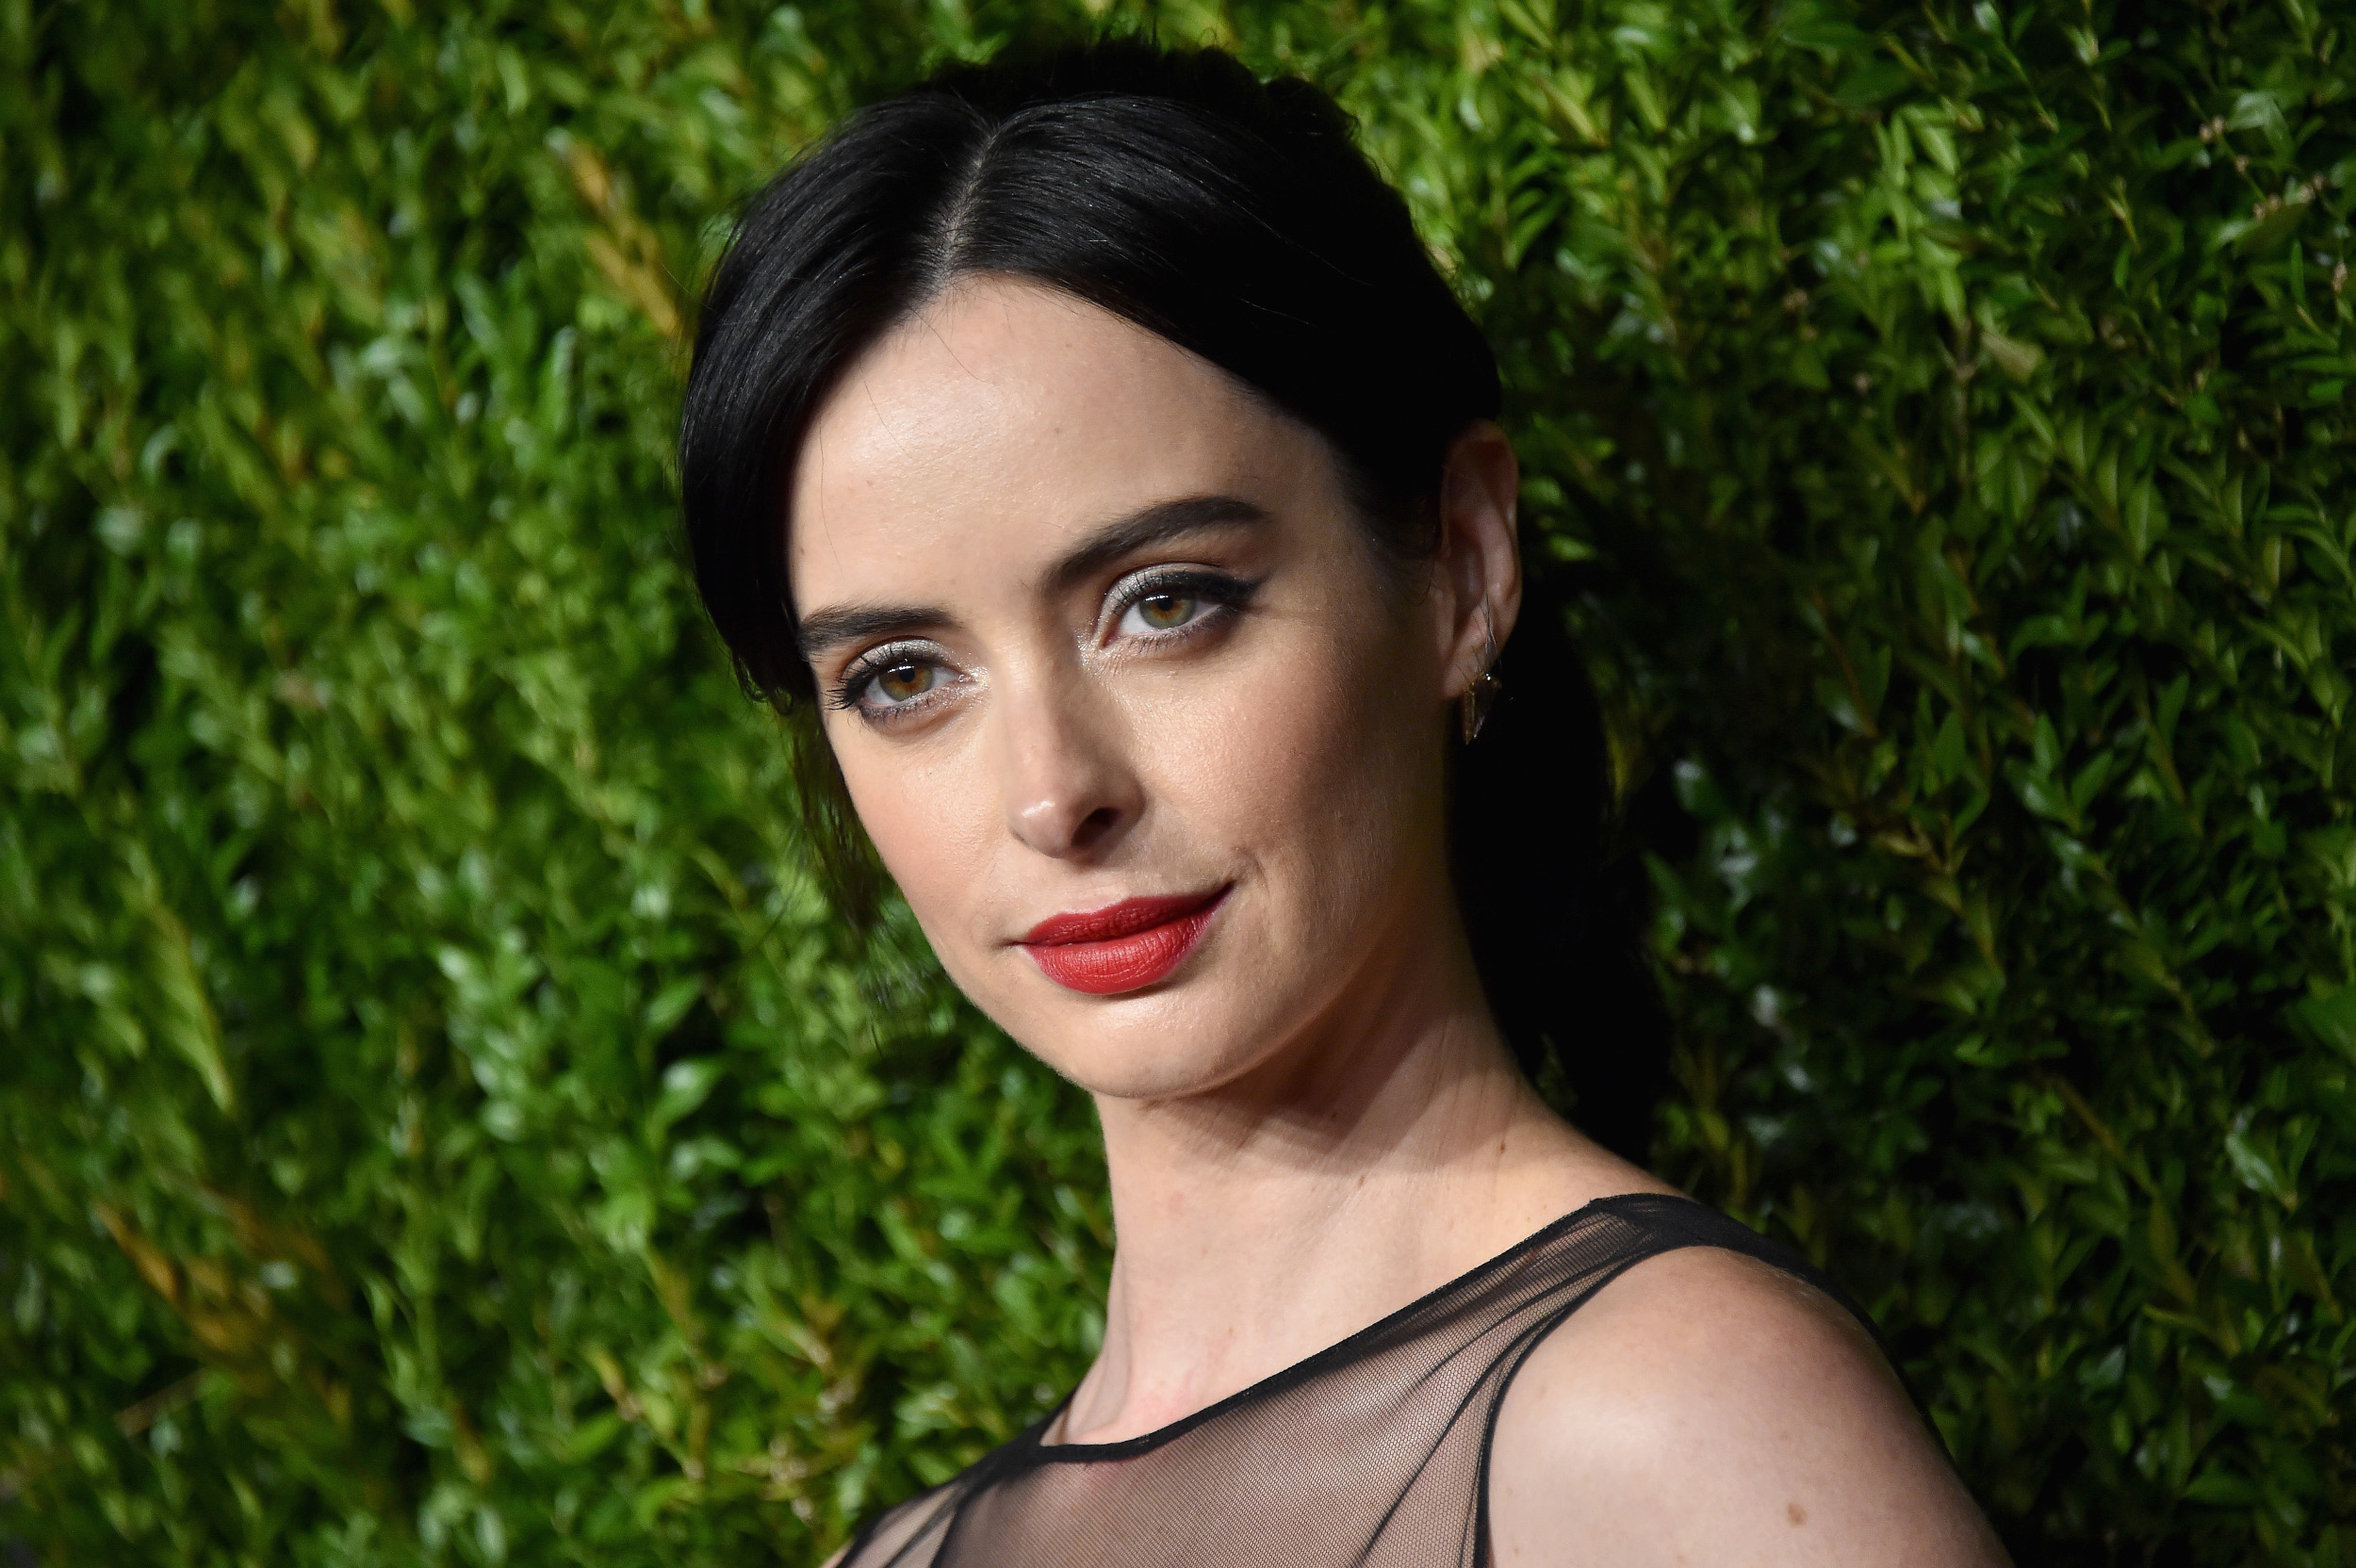 Krysten Ritter stands in front of greenery wearing a black sheer dress and red lipstick